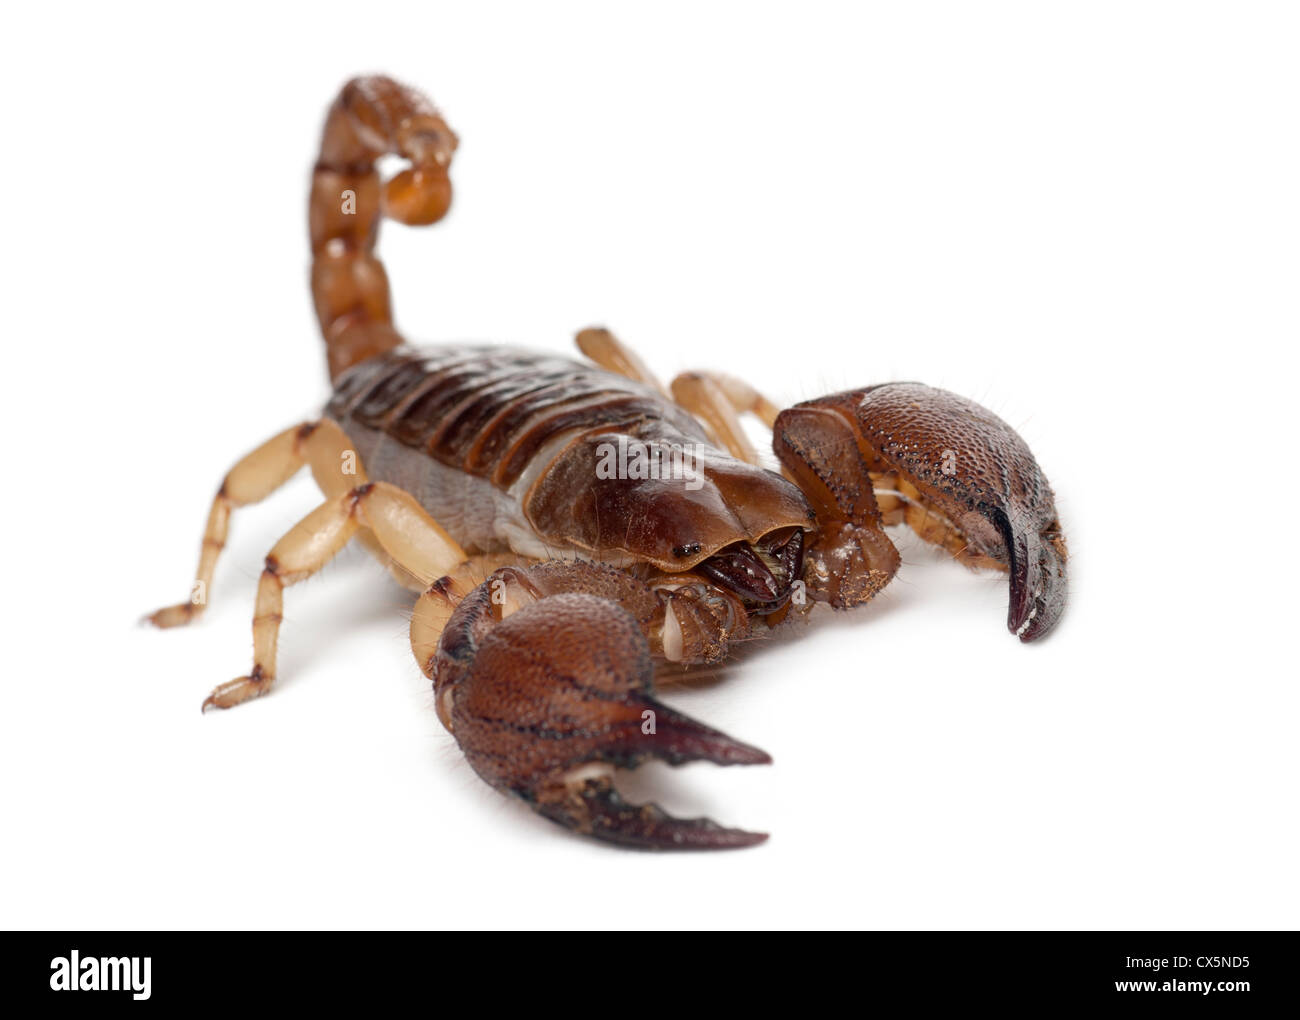 Chevêche brillant ou Yellowlegged scorpion scorpion rampante, Opistophthalmus glabrifrons, against white background Banque D'Images